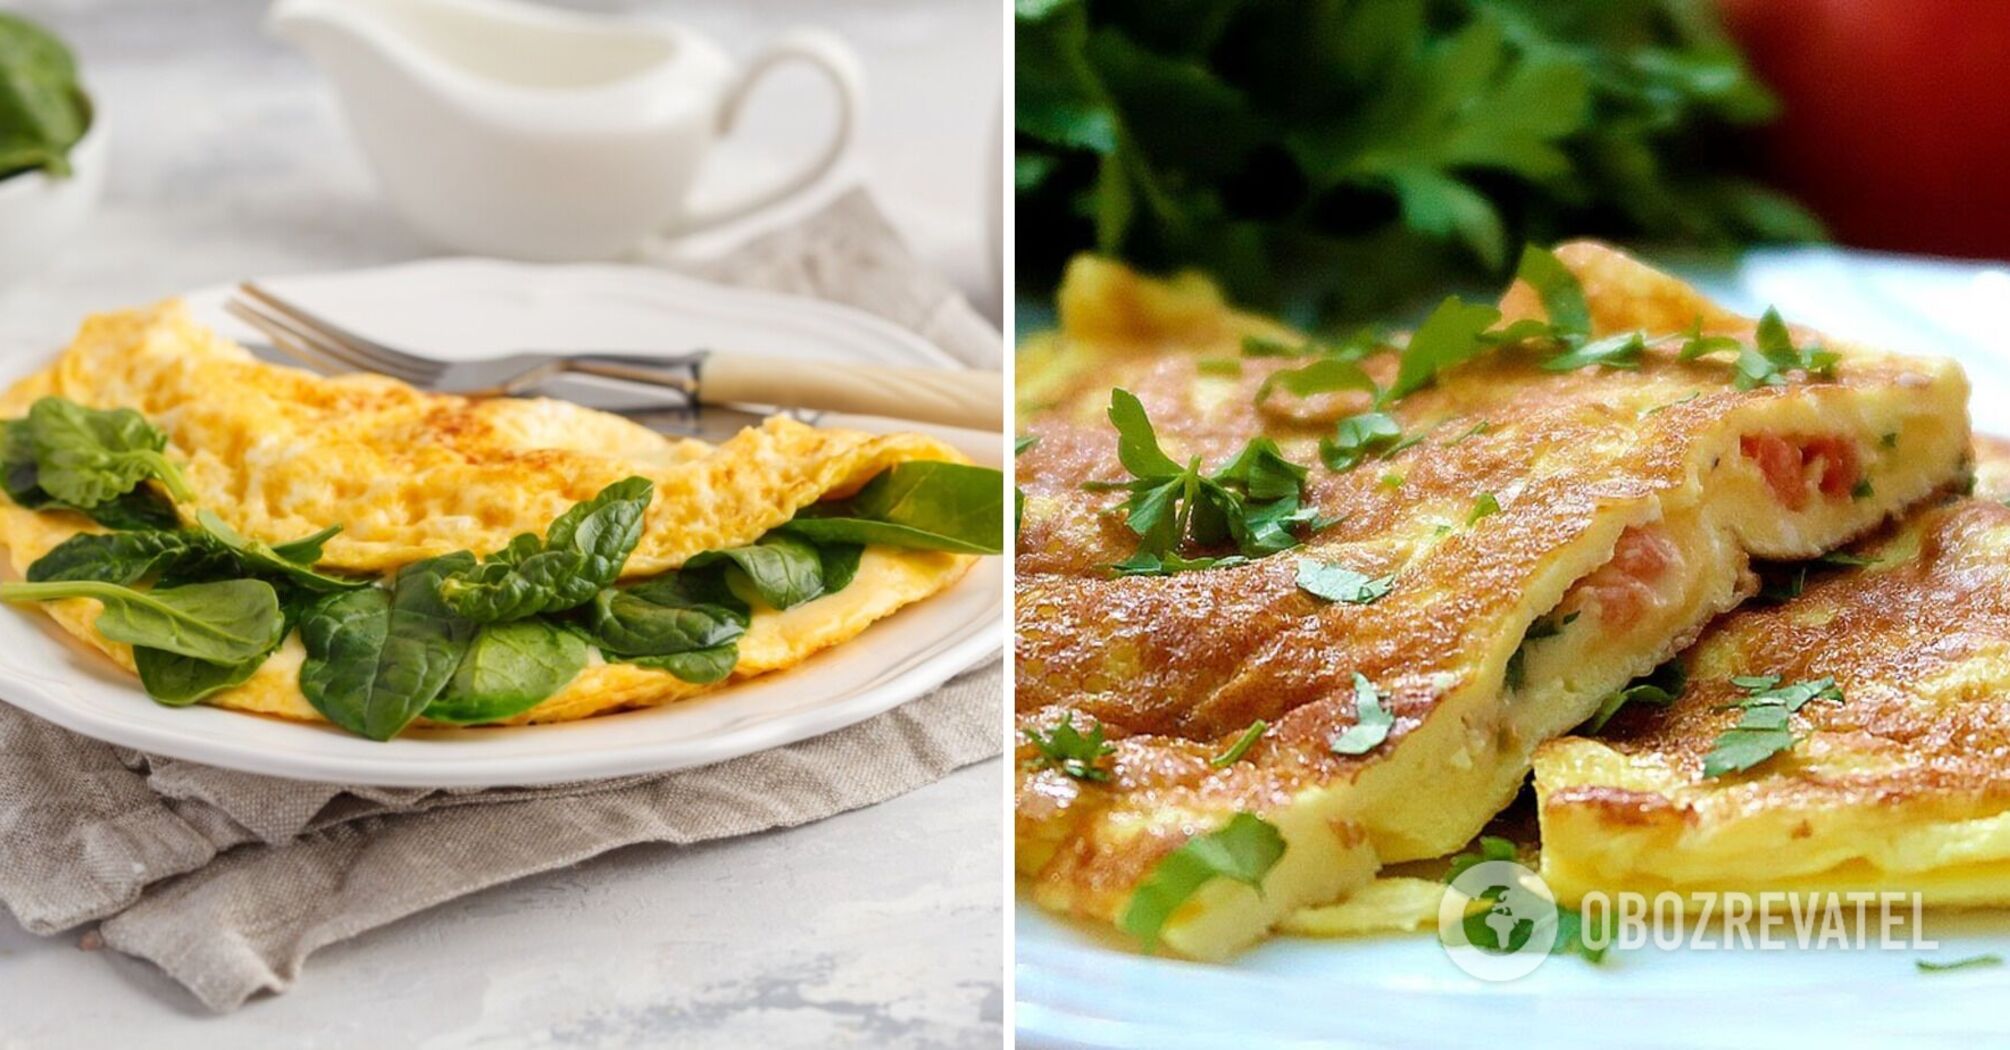 Fluffy omelette with a filling in 5 minutes: simple ideas for a hearty breakfast